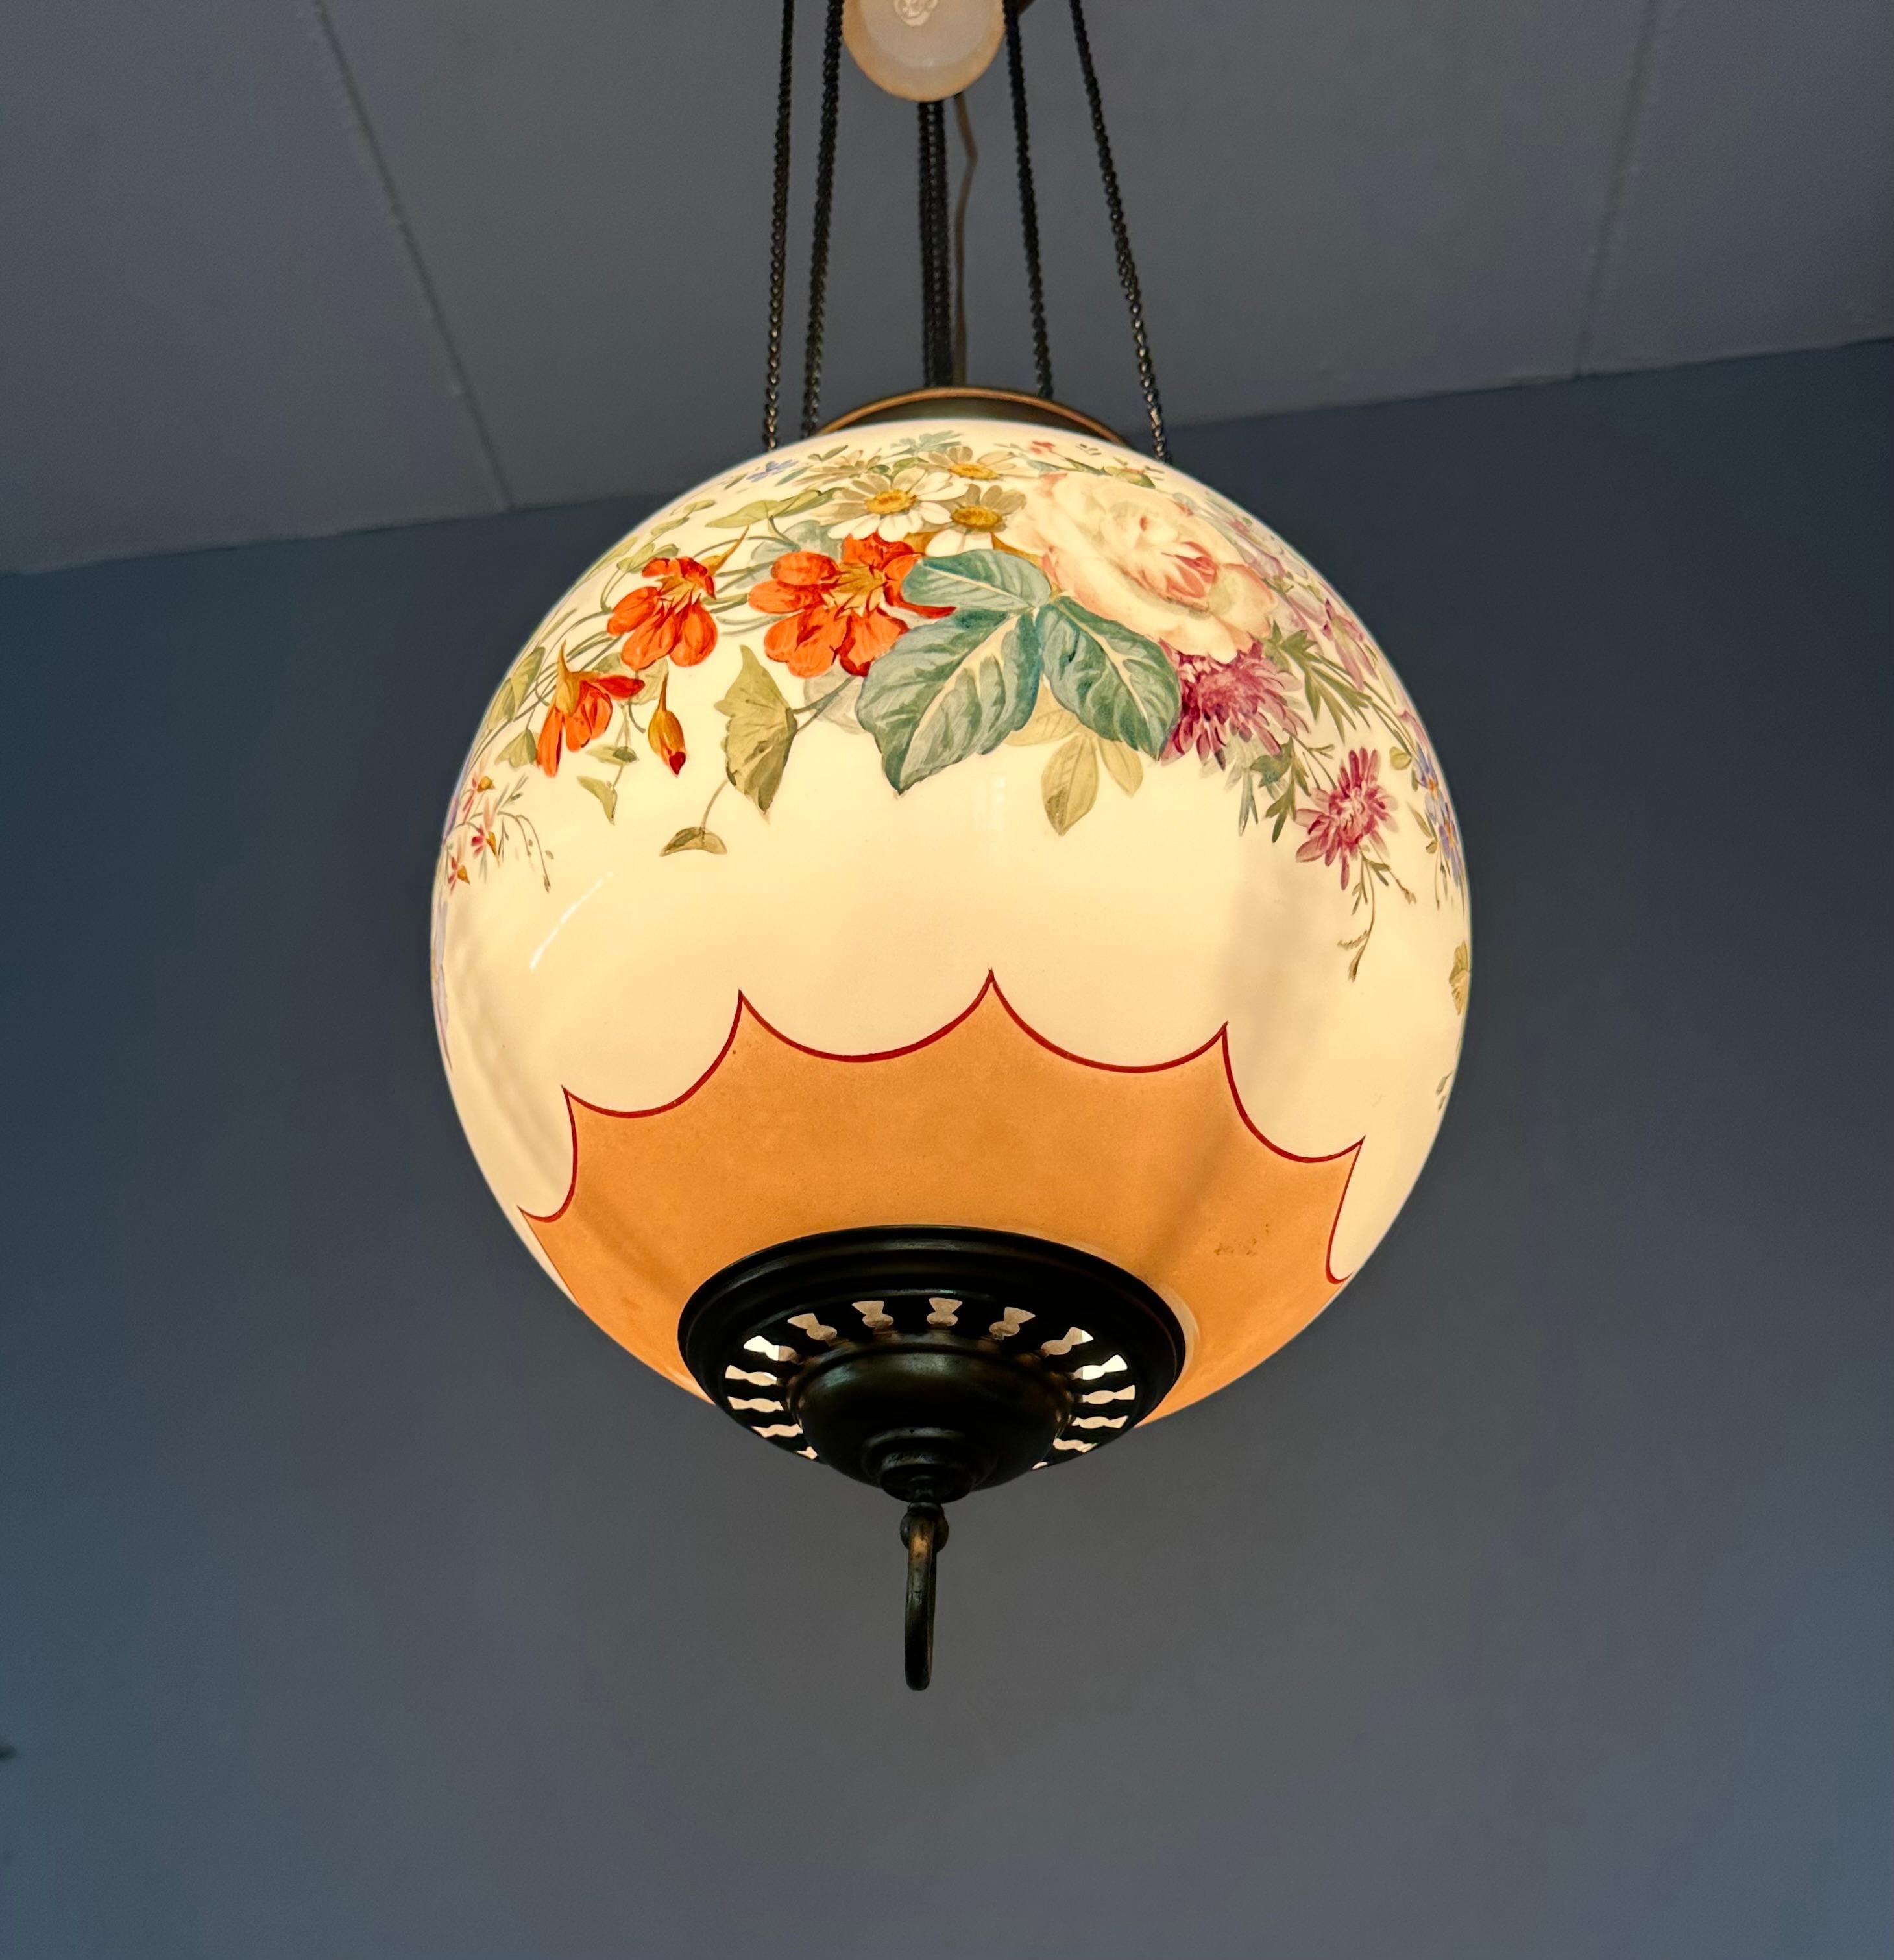 Antique Round Opaline Glass Shade Pendant Light with Wreath of Flowers Decor For Sale 12